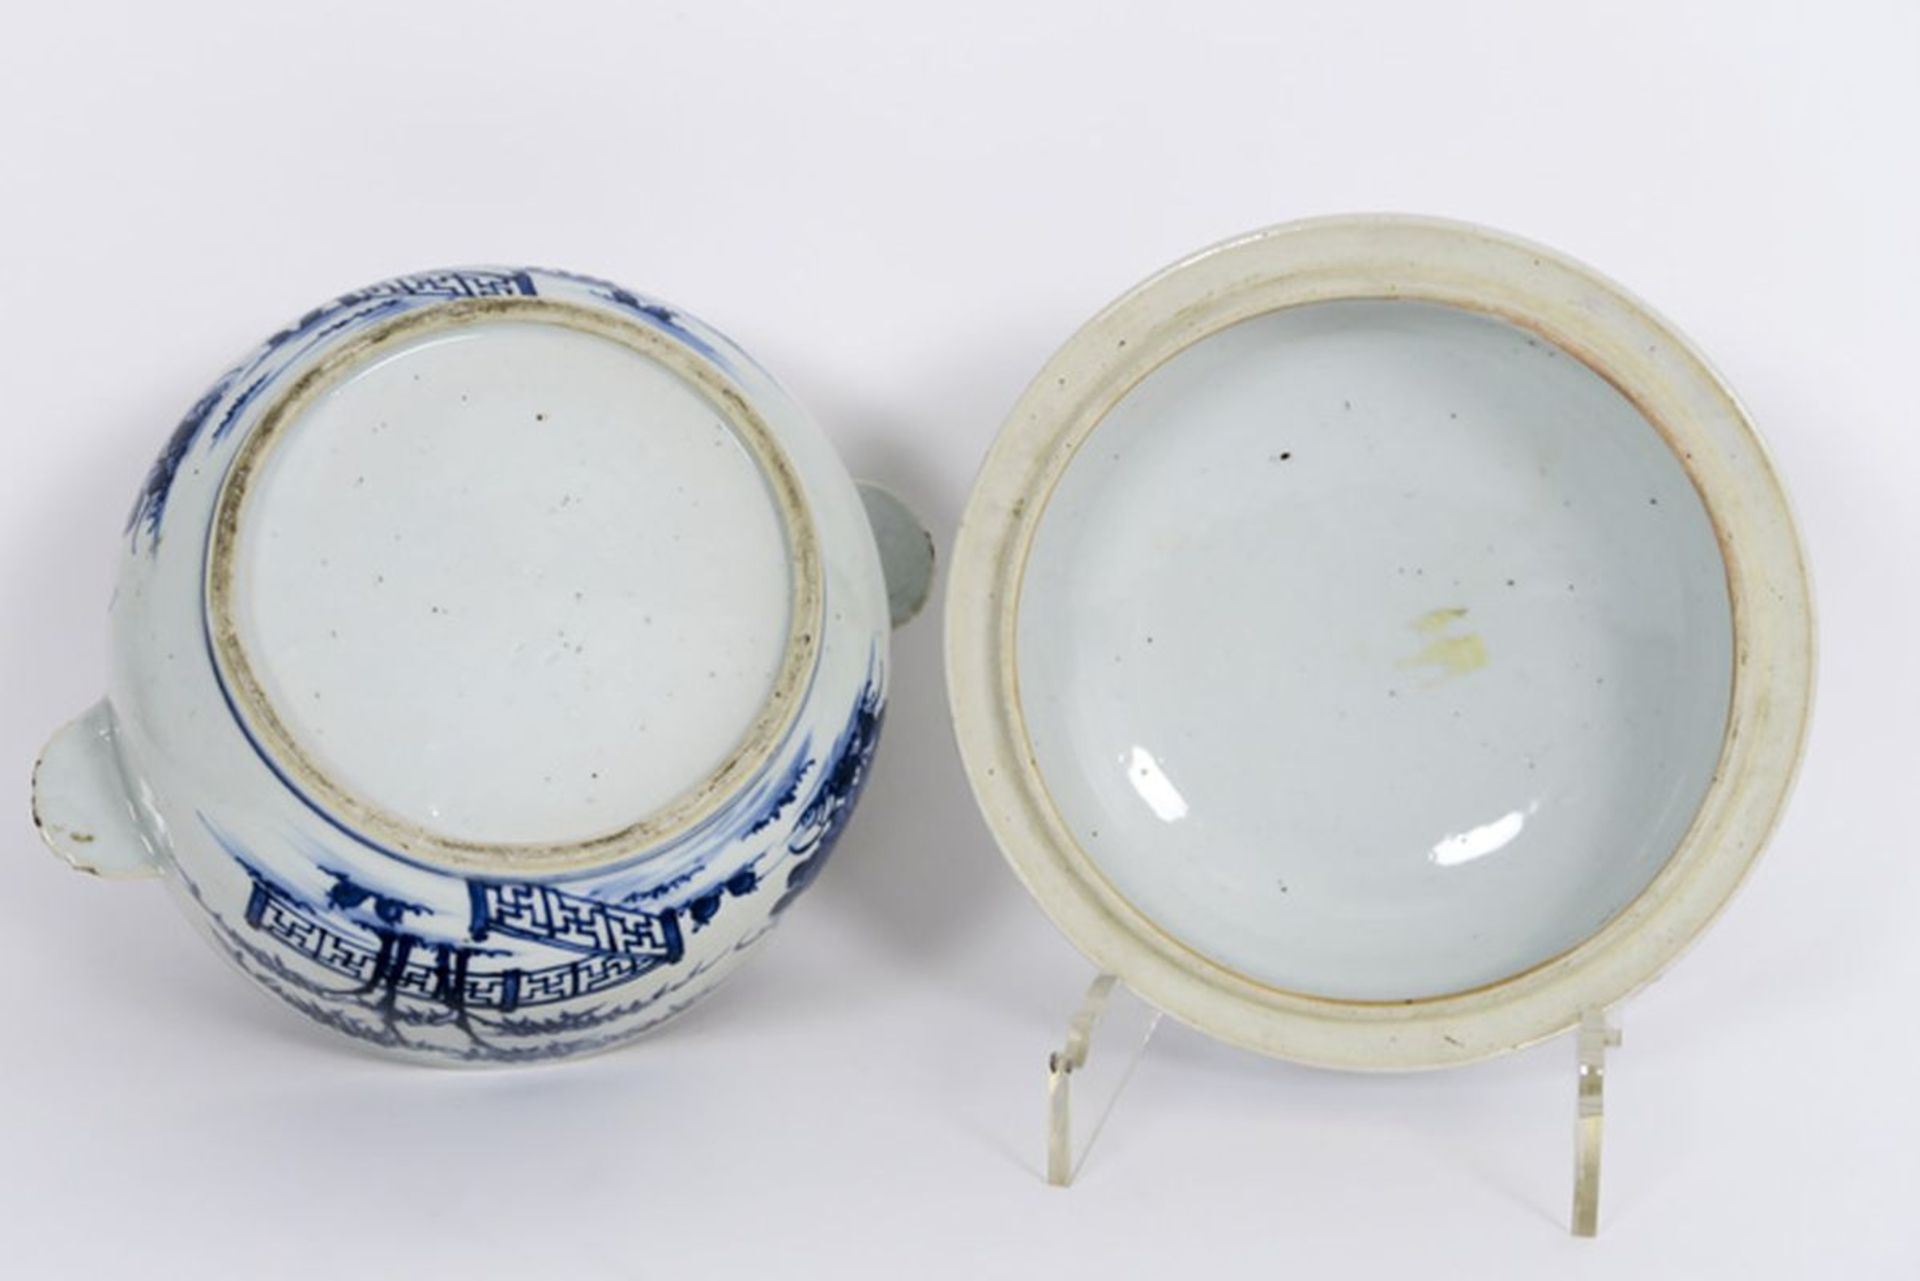 18th Cent. Chinese lidded tureen in porcelain with blue-white decor - - Achttiende [...] - Image 4 of 4